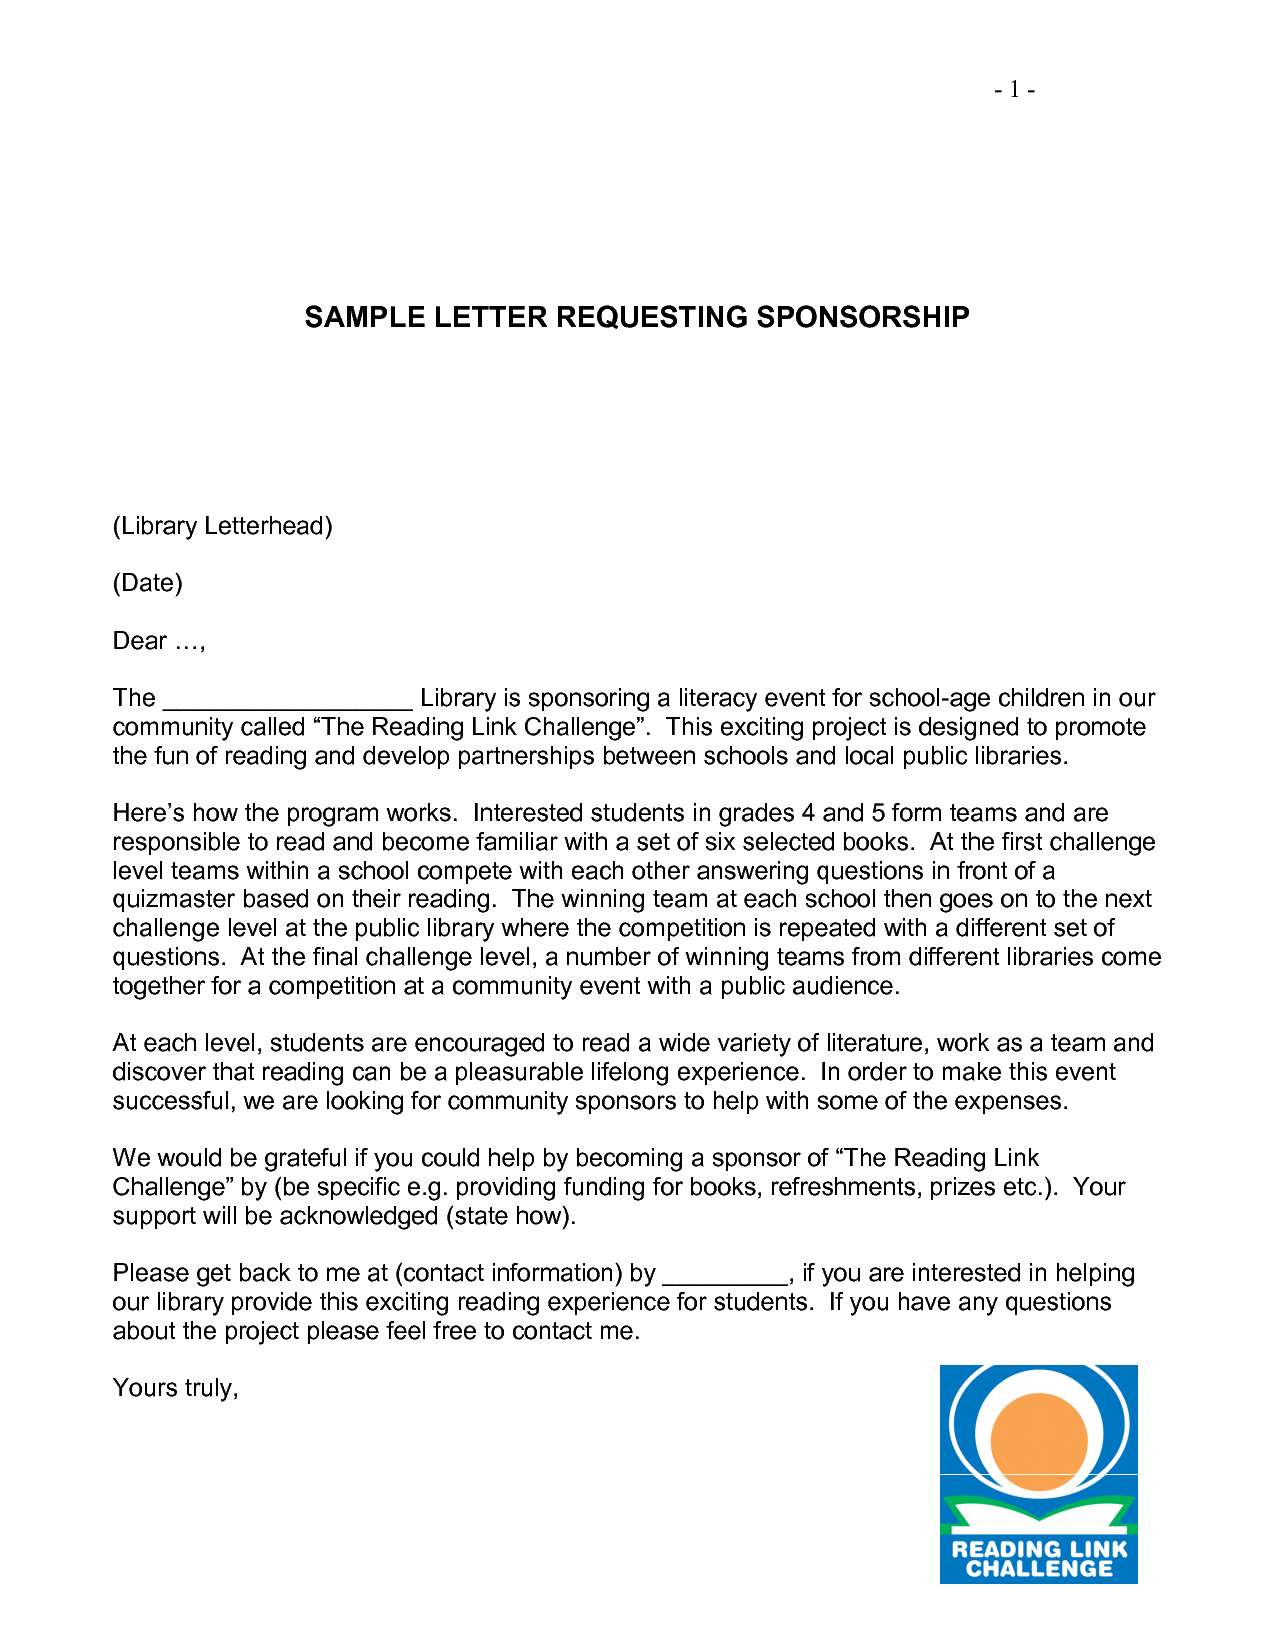 Sample Sponsorship Request Letter Pdf from learn.ally360.com